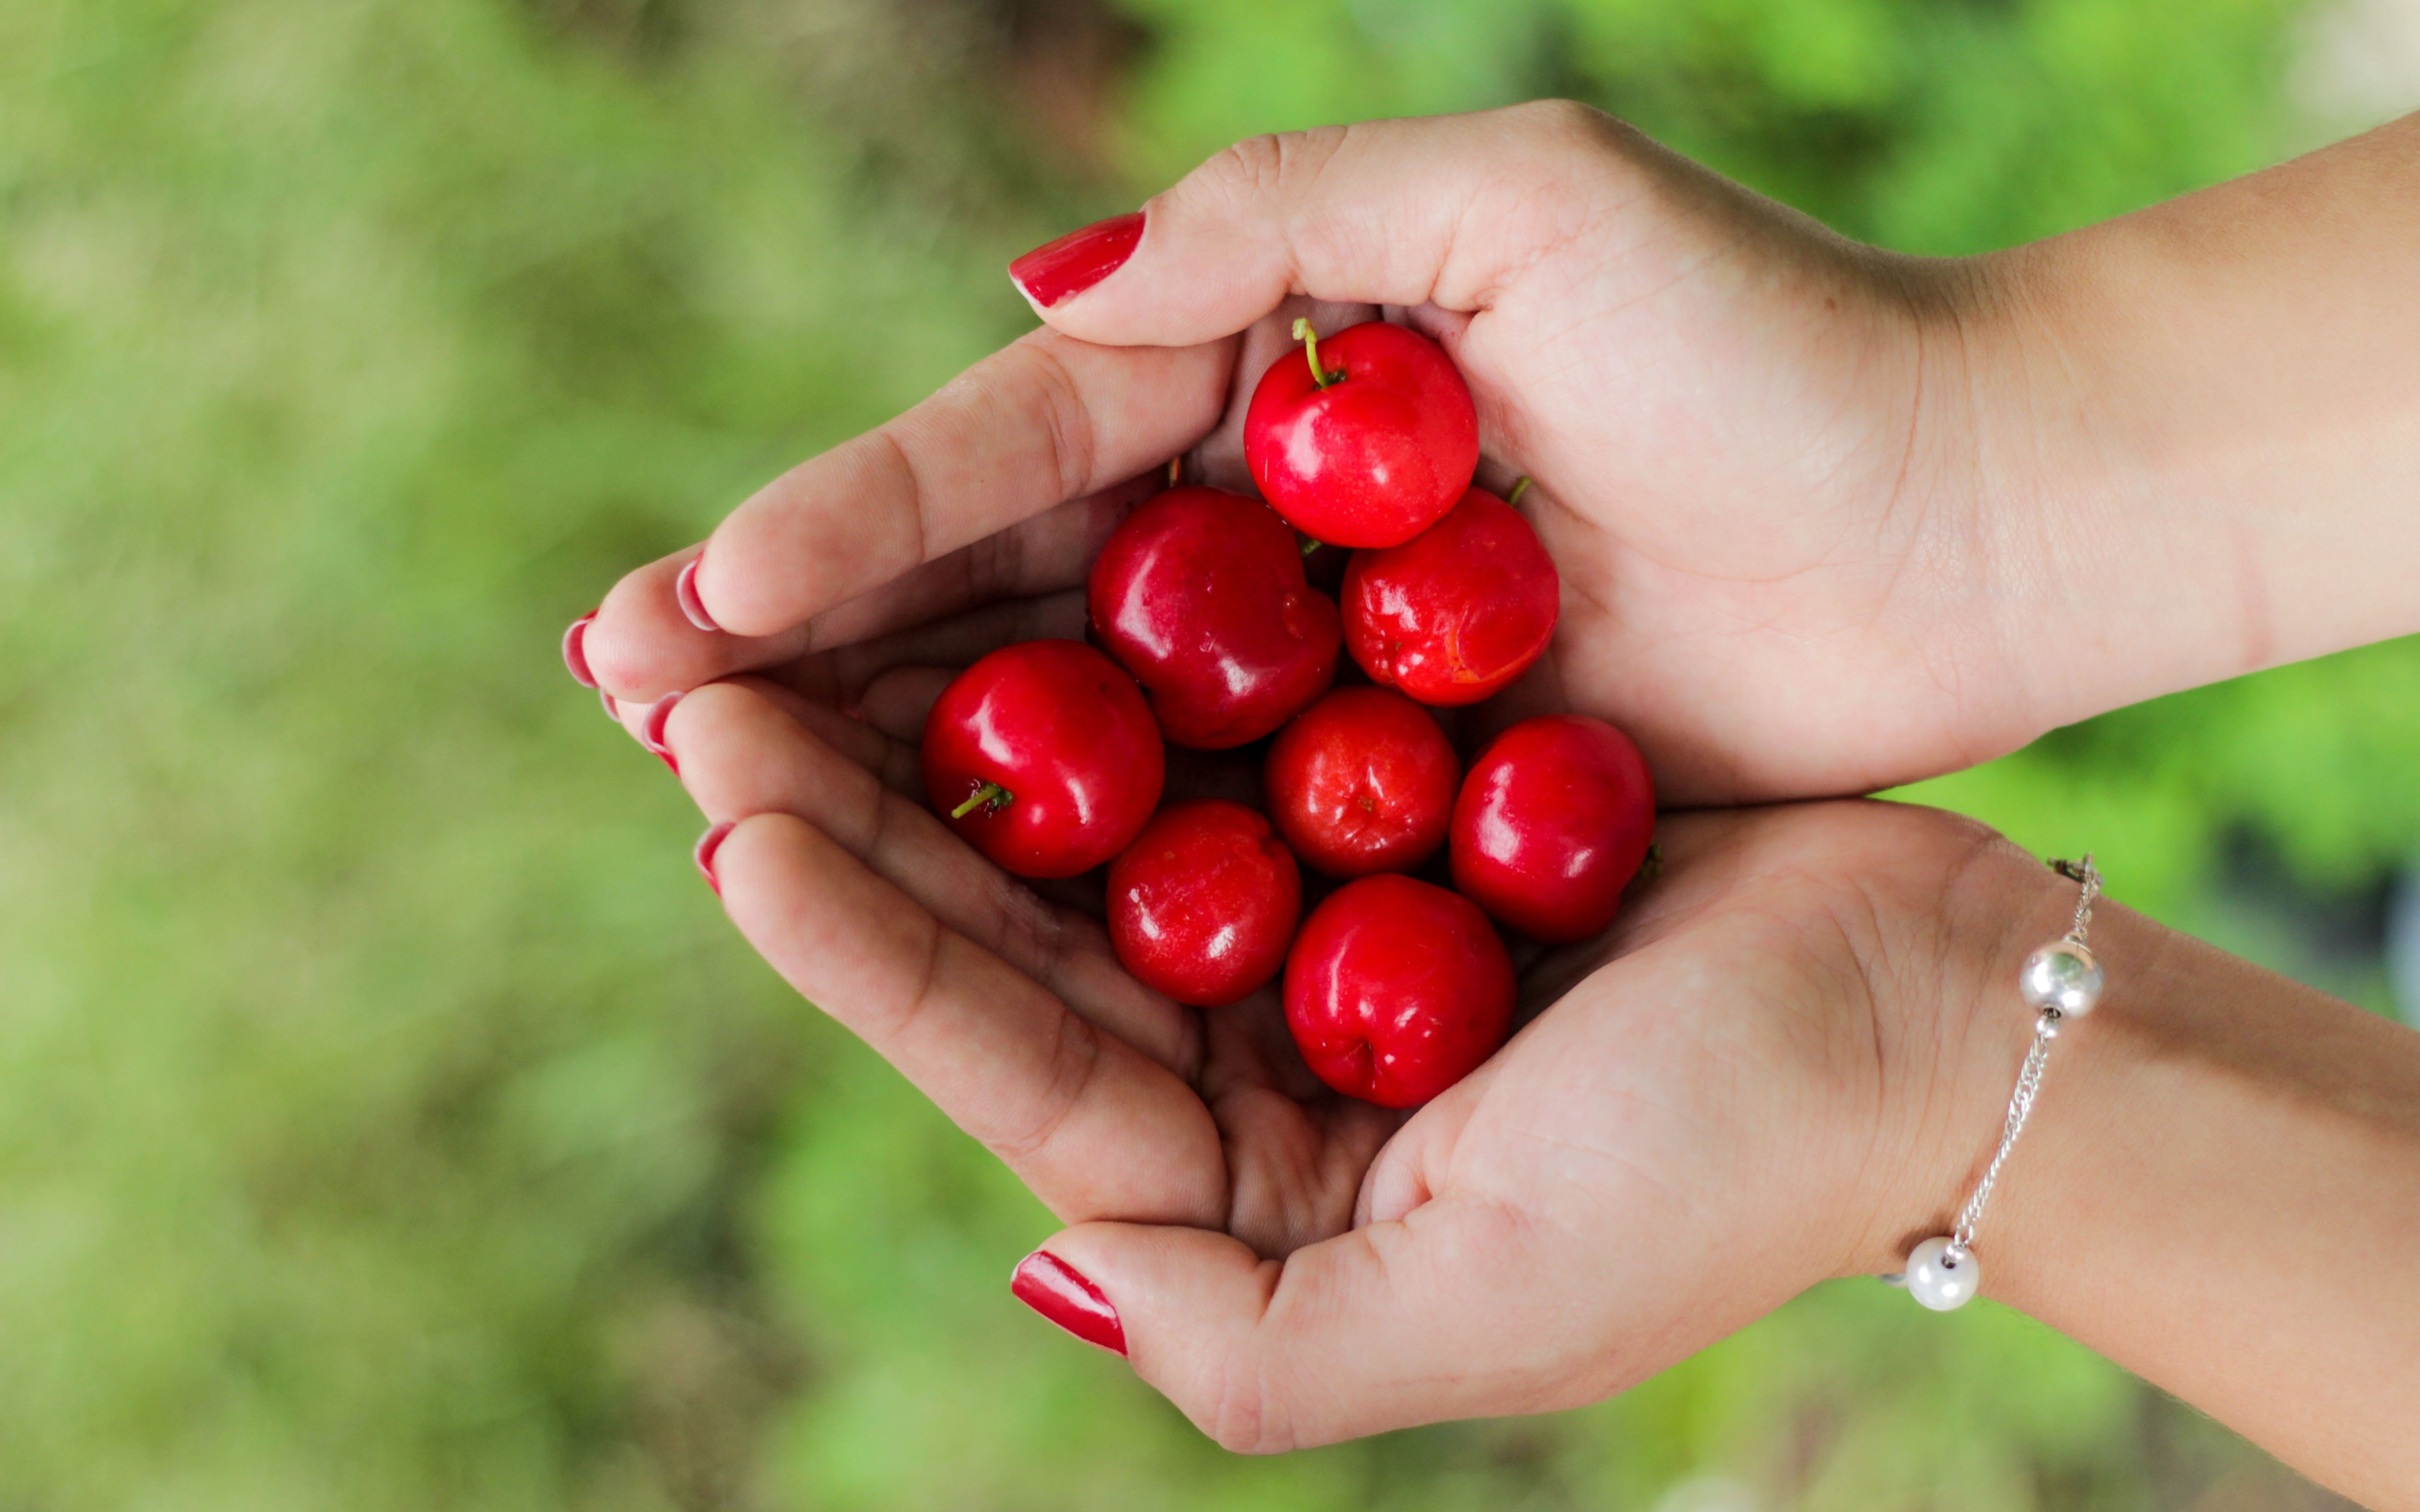 Hands filled with cherries wallpaper 3840x2400